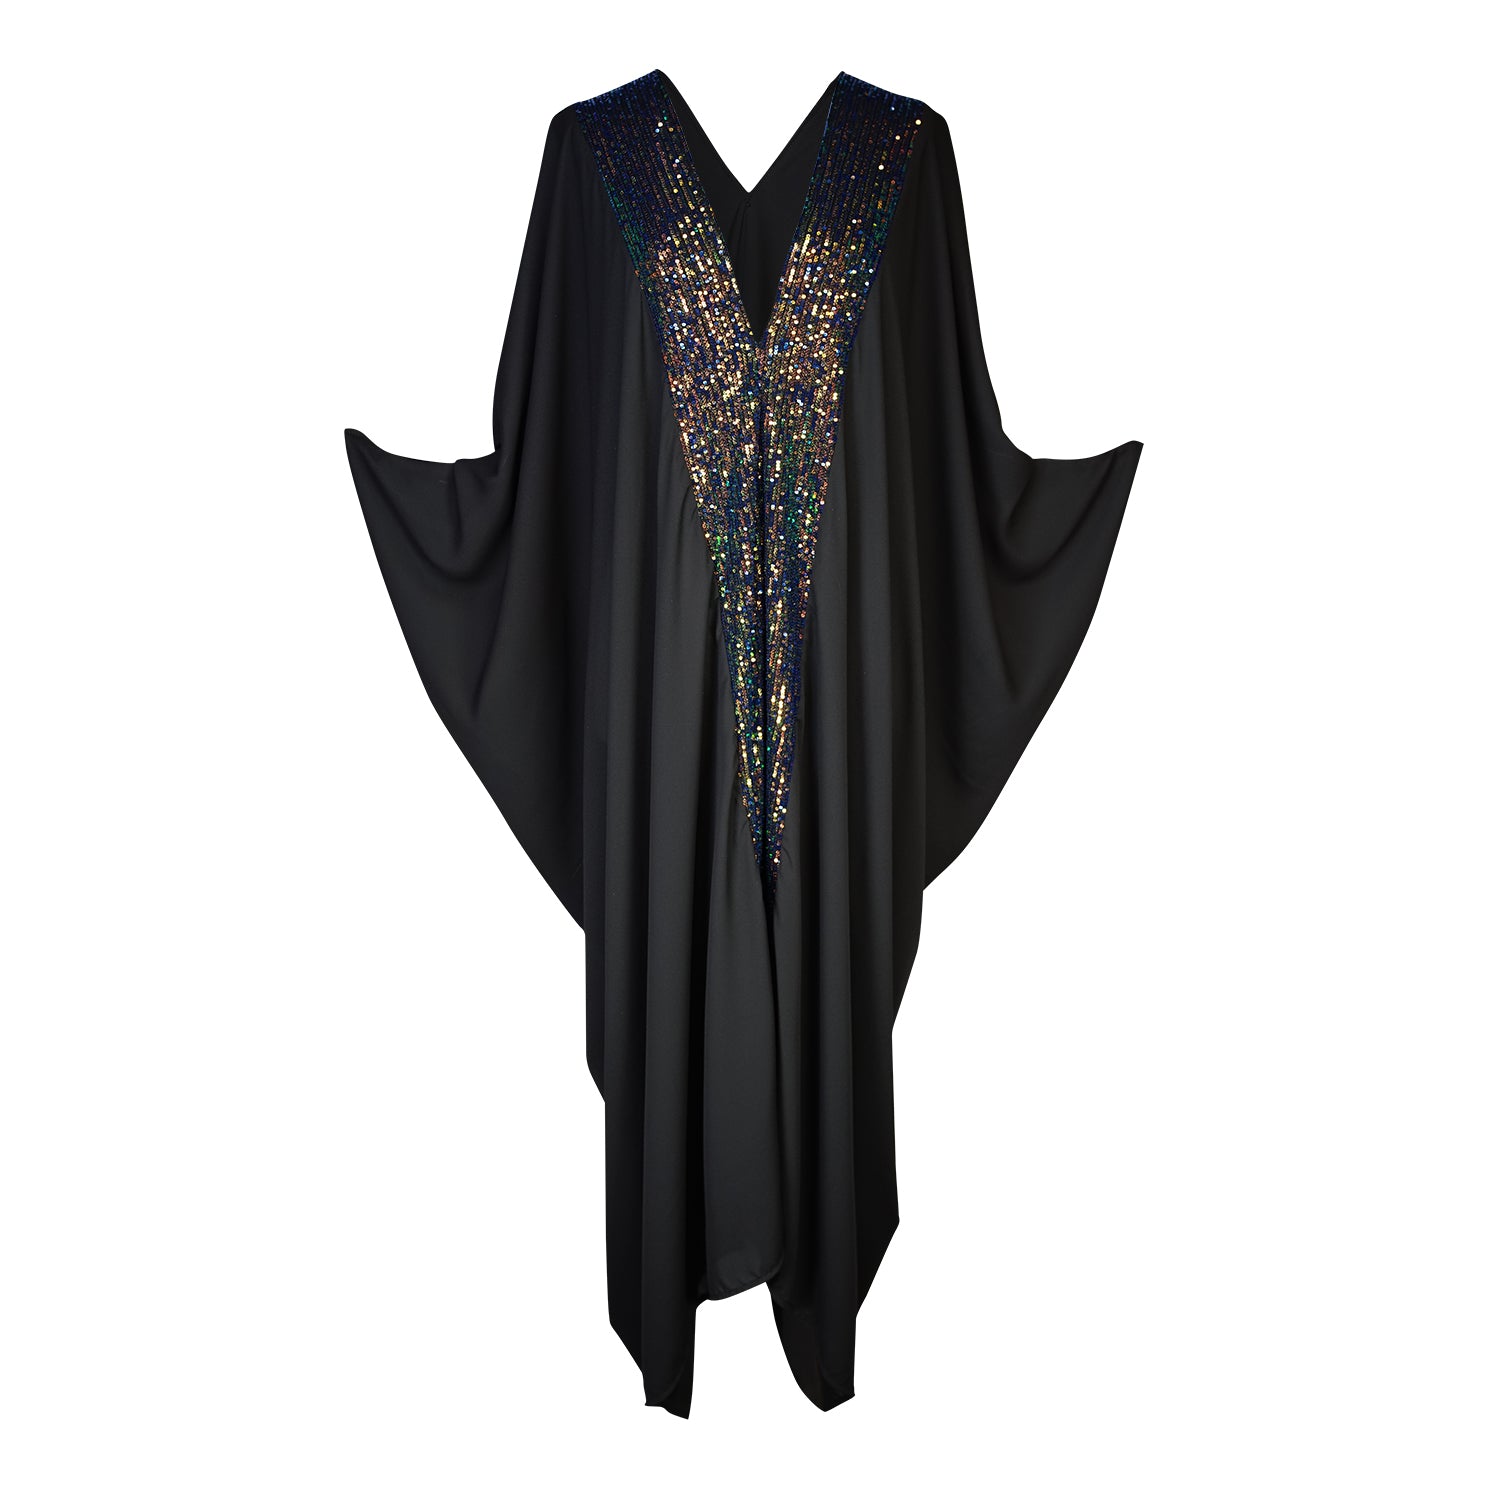 Jennafer Grace Gryphon Deluxe caftan made from a semi-opaque black georgette chiffon with an iridescent soft sequin lapel. Creating a v-neck, the sequins lapel that meets in center and goes down front and back, creating a Y shaped design. Featuring batwing sleeves and ankle length hem. Unisex handmade in California USA.